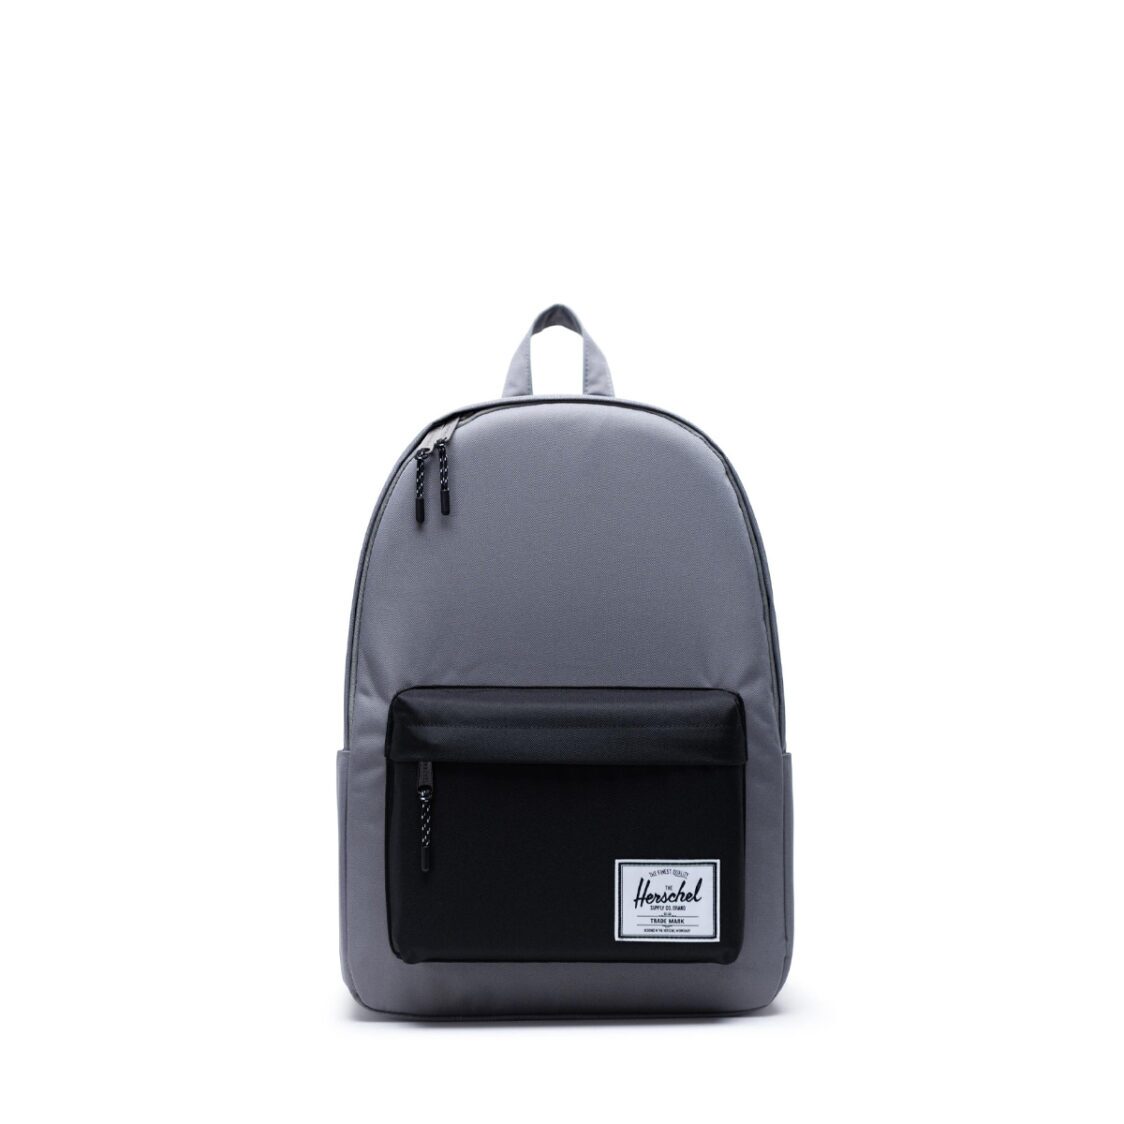 Herschel Classic X-Large GreyBlack Backpack 10492-02998-OS